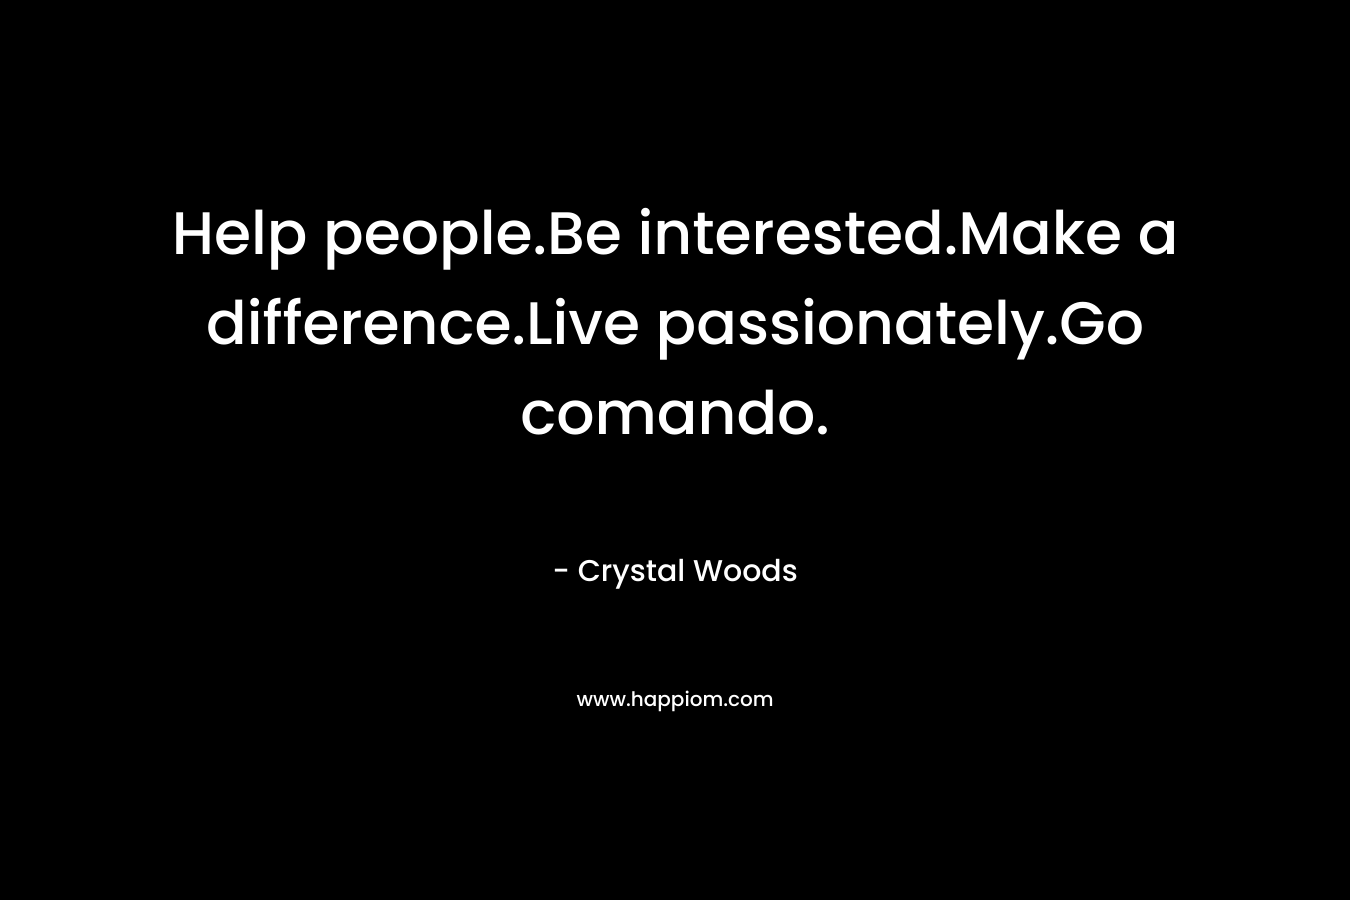 Help people.Be interested.Make a difference.Live passionately.Go comando. – Crystal Woods